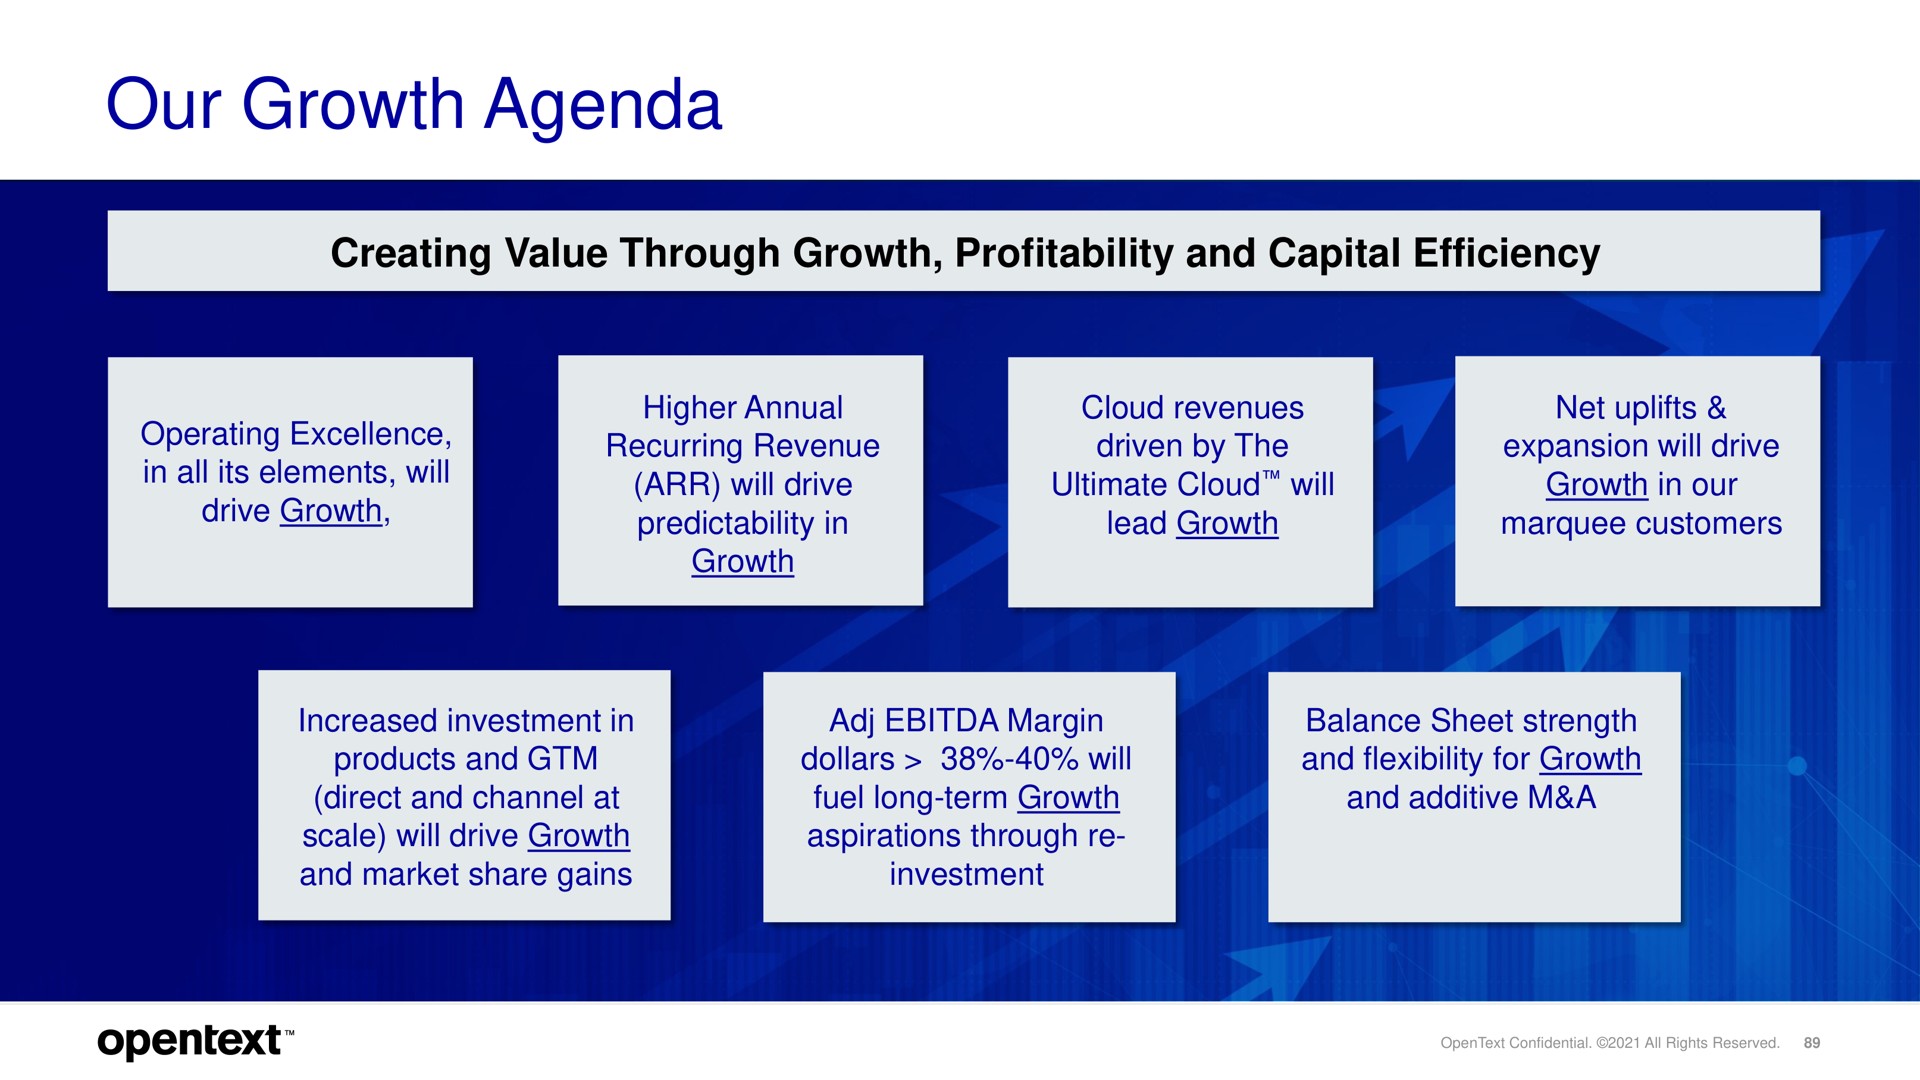 our growth agenda | OpenText